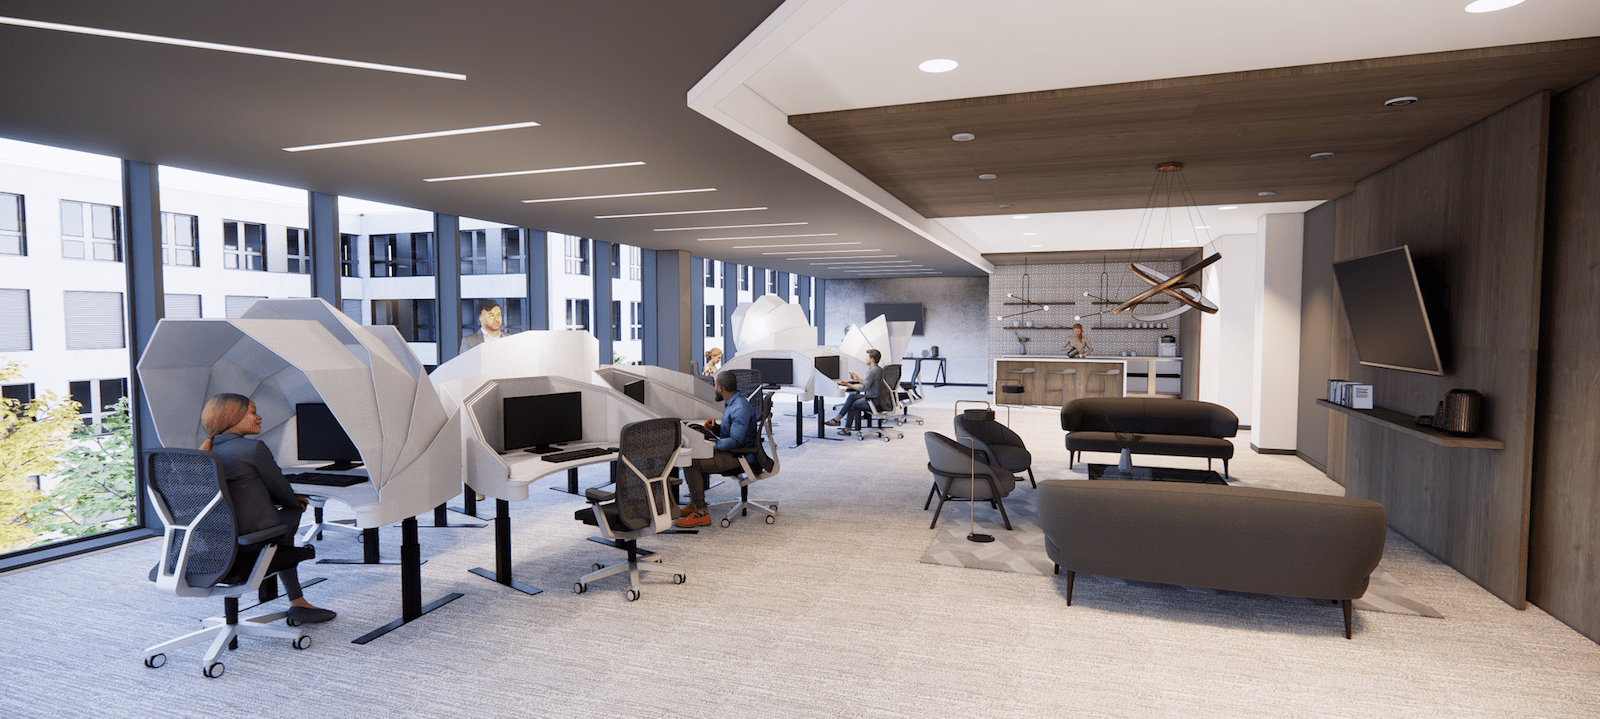 Rendering of a modern open floor plan company featuring MojoDome units - an electric sit to stand desk bundled with acoustic sound absorbing privacy panels